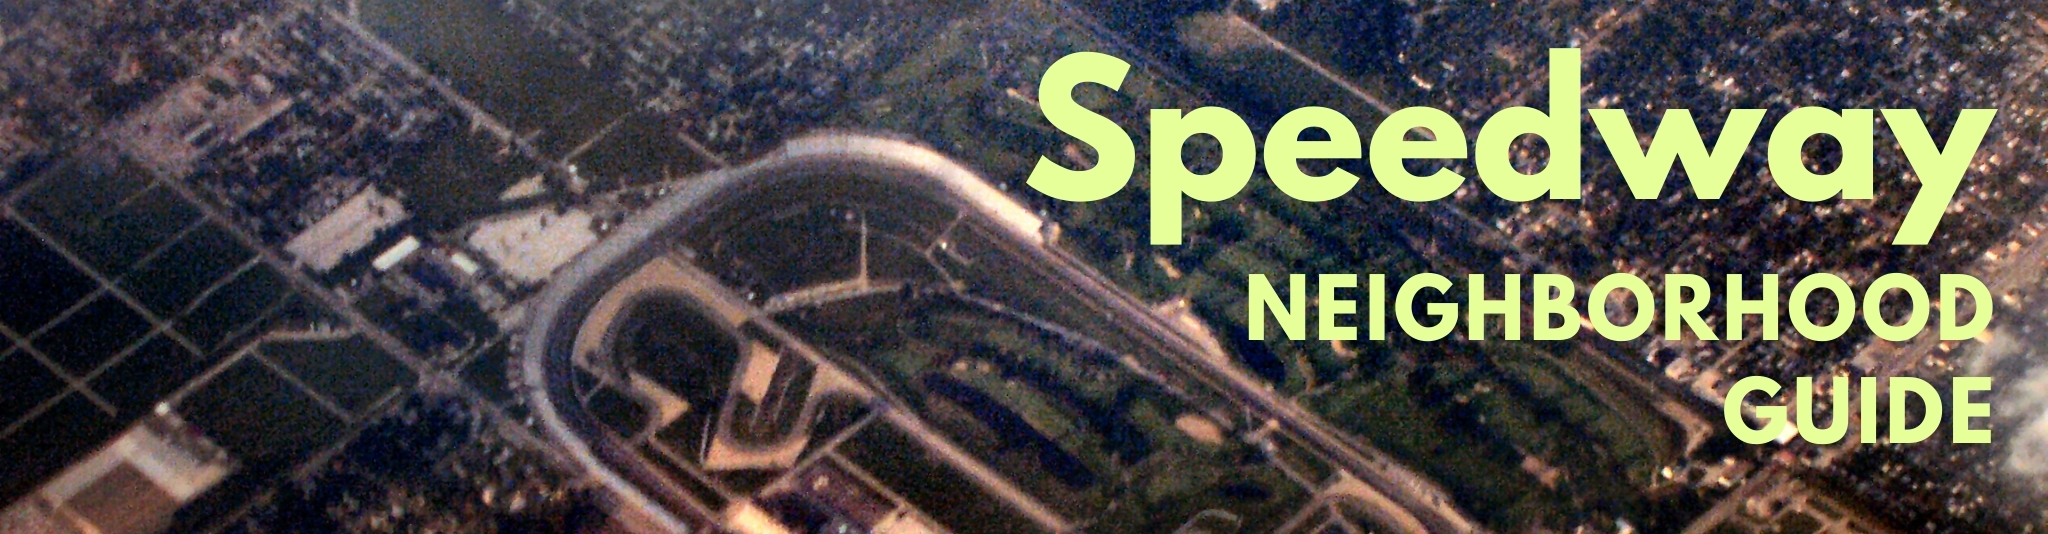 The Indianapolis Motor Speedway is the most famous landmark in Speedway, Indiana.